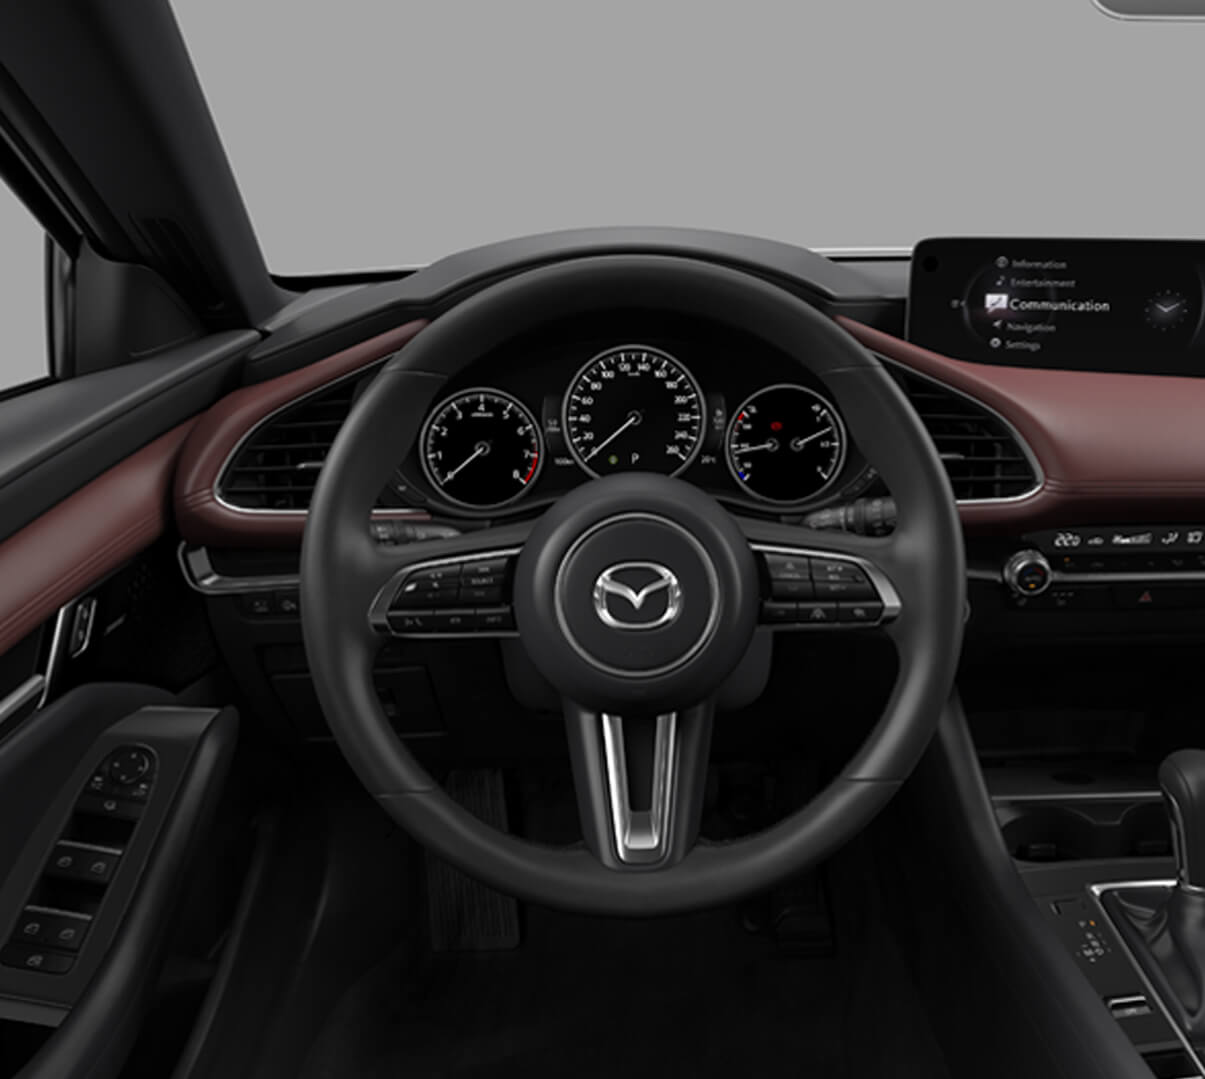 A close up of the steering wheel of the Madza 3 with all its beautiful details.